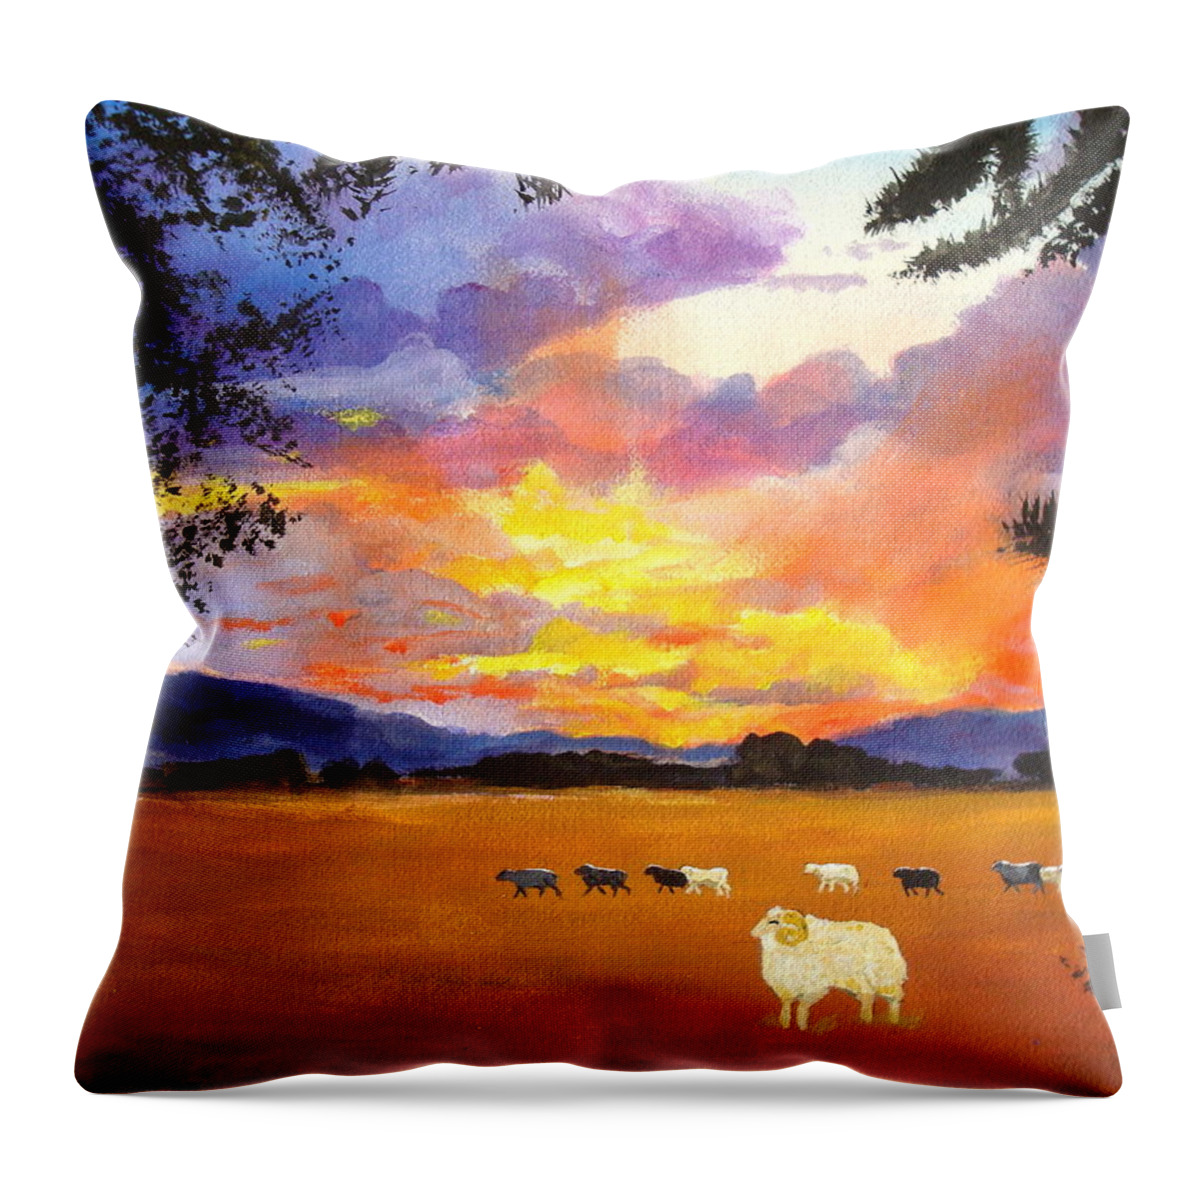 Sheep Throw Pillow featuring the painting Alvin Counting Sheep by Cheryl Nancy Ann Gordon